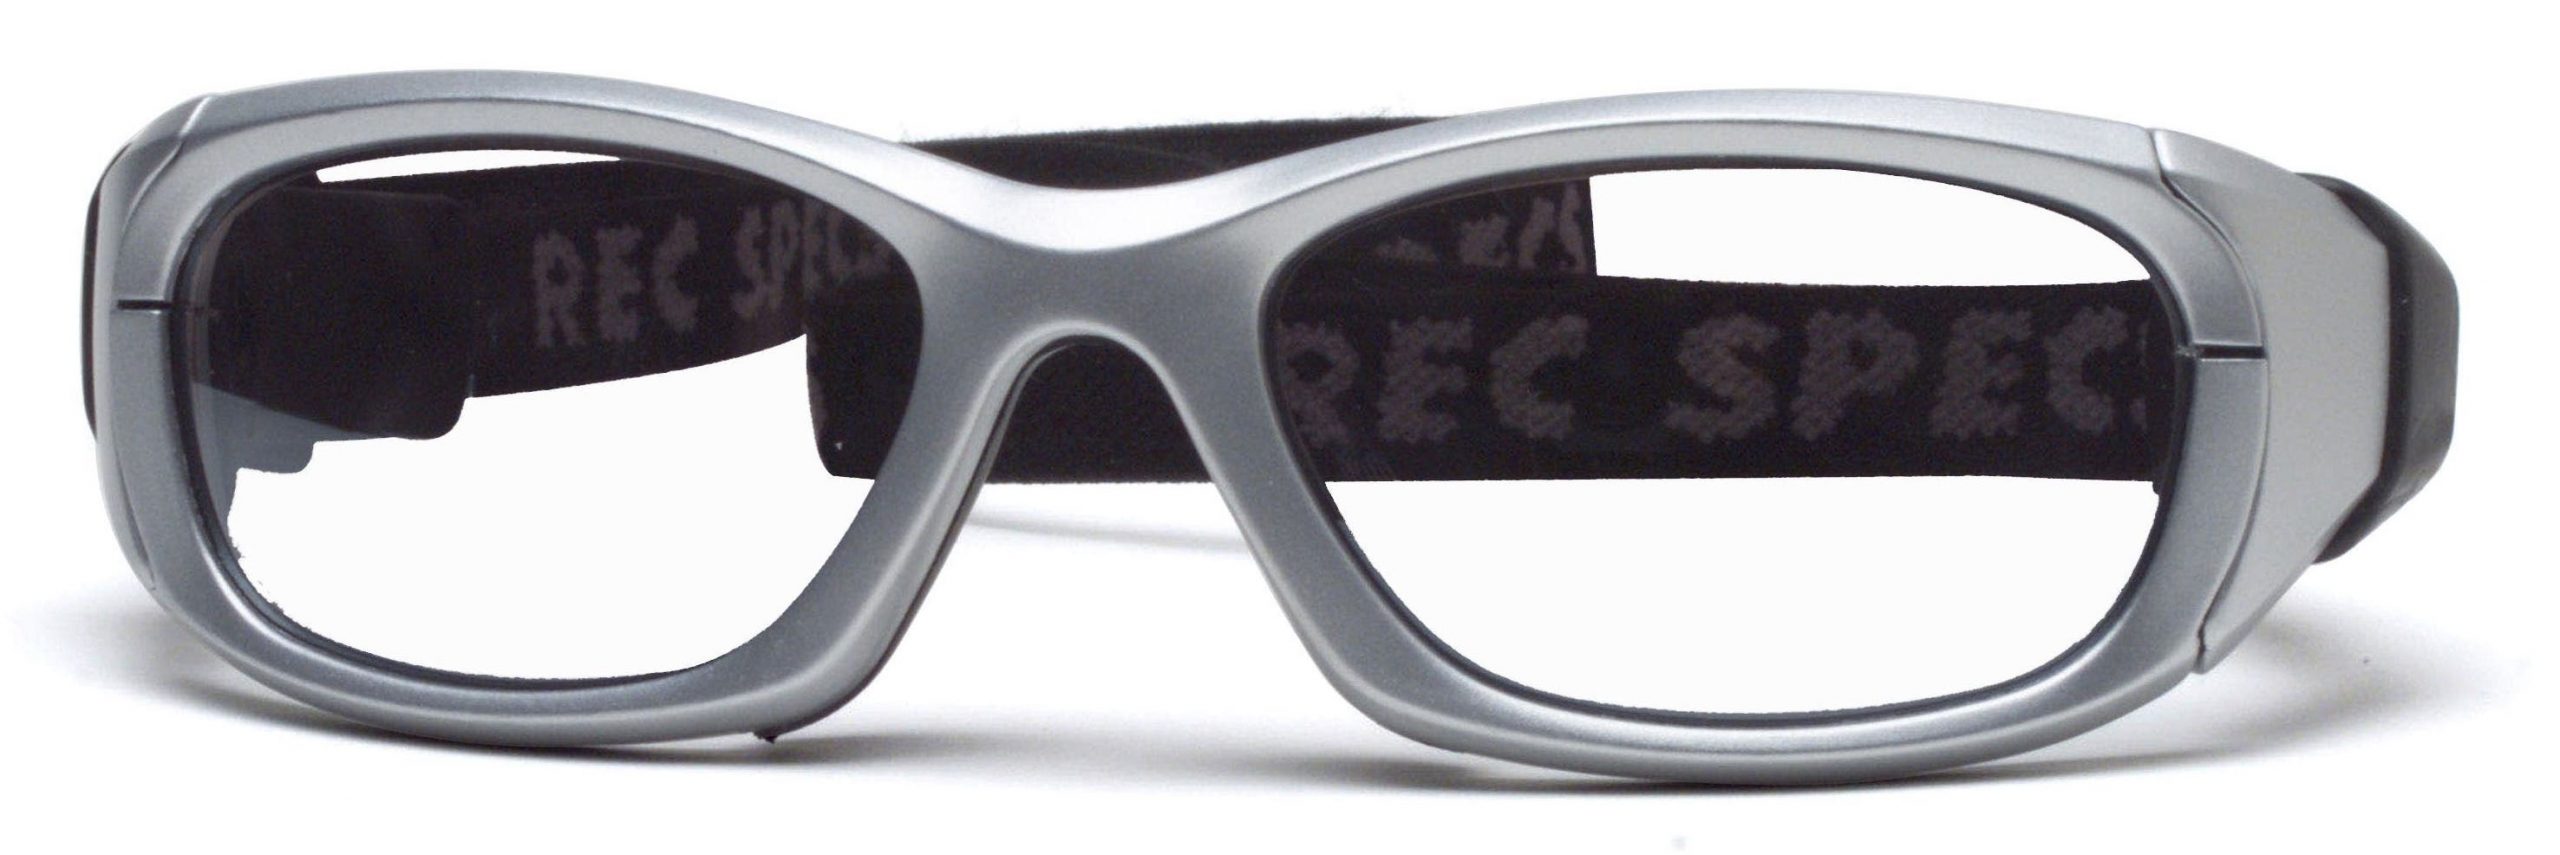 Safety-rated Rec Specs Maxx 31 sports goggles in silver with black elastic strap and clear lenses.